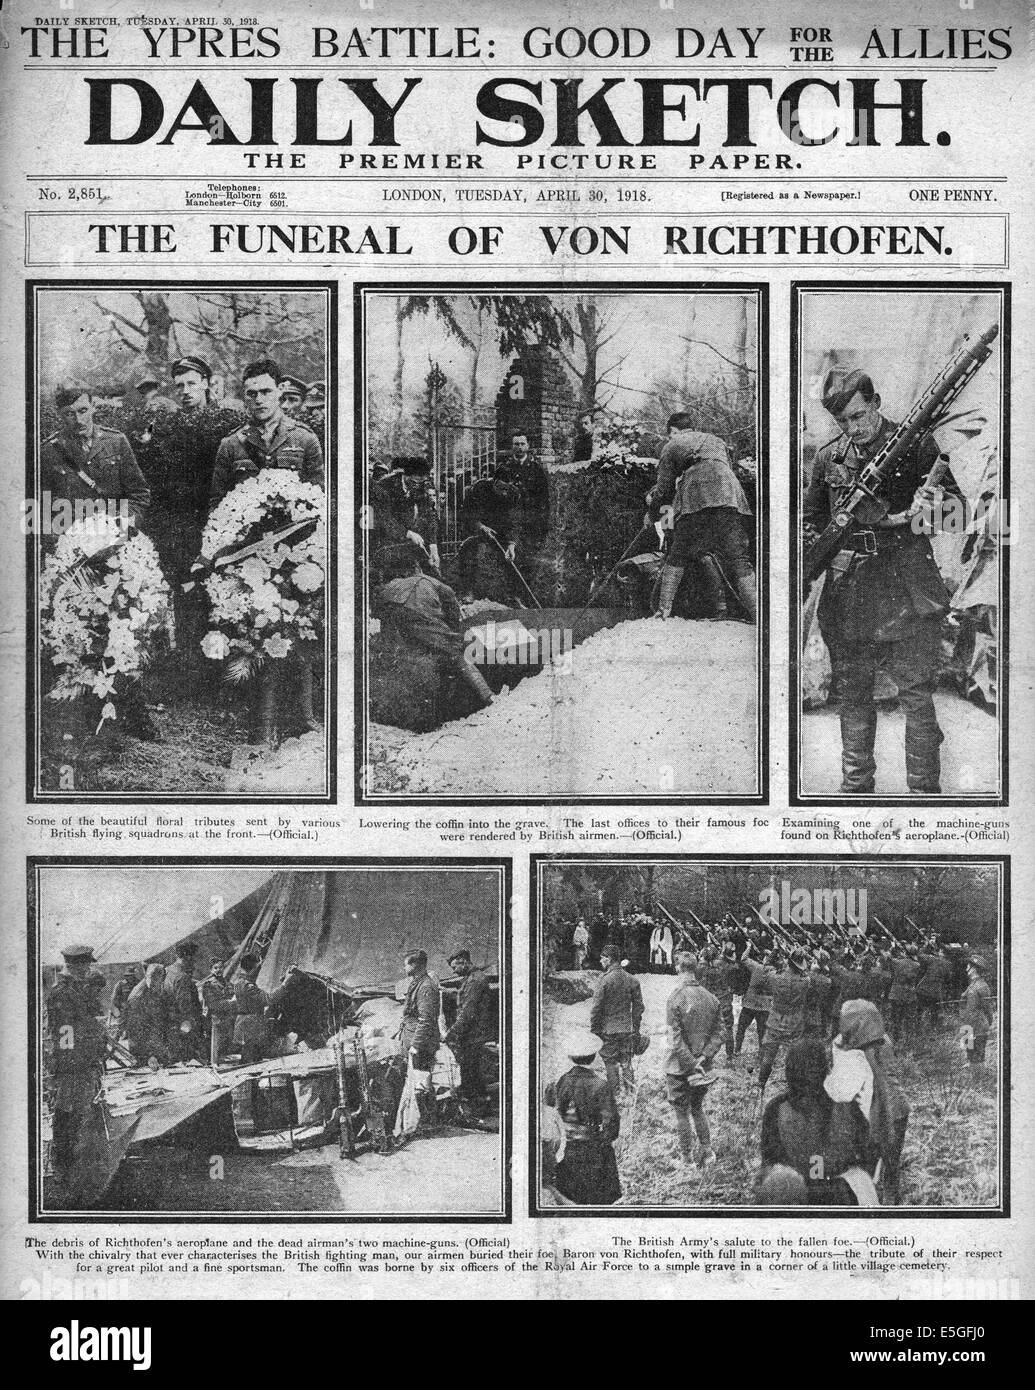 1918 Daily Sketch front page reporting the Funeral of Manfred von Richthofen Stock Photo